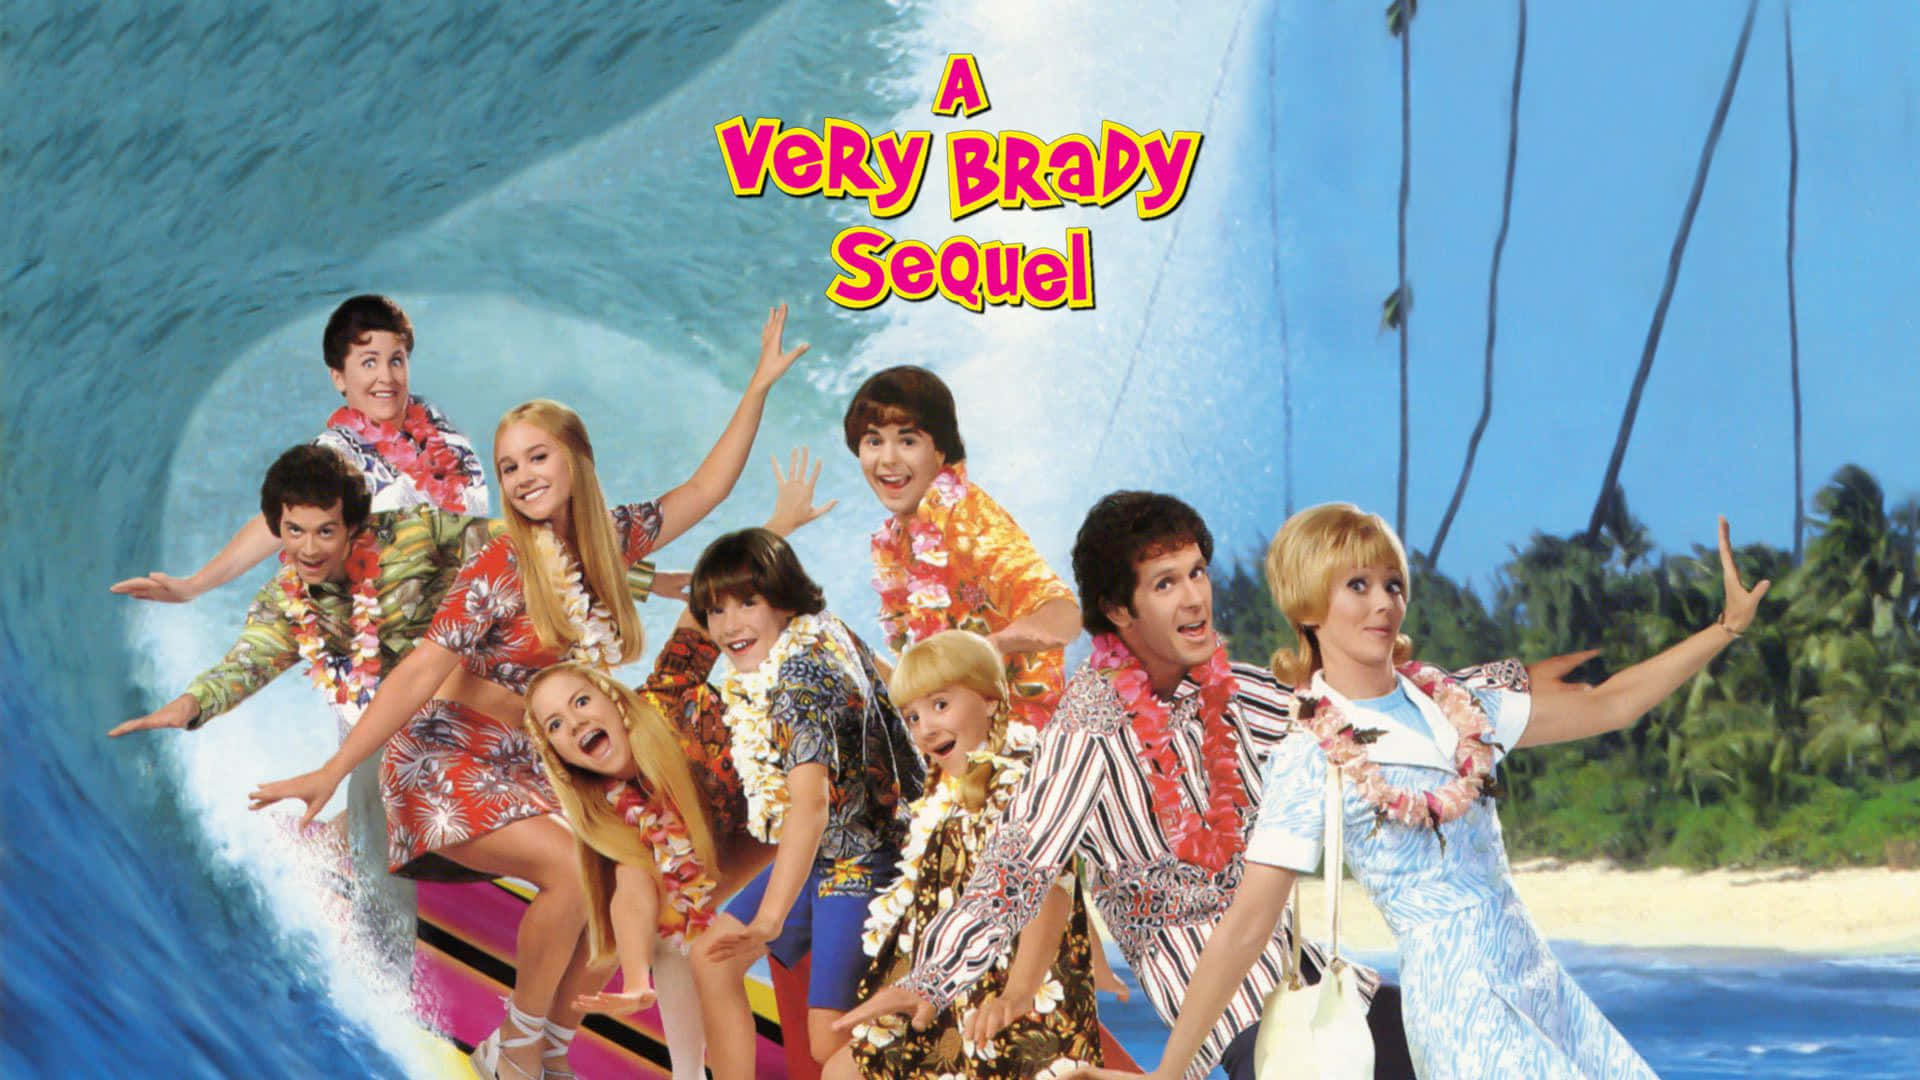 "The Brady Bunch - You're Part of the Family!" Wallpaper